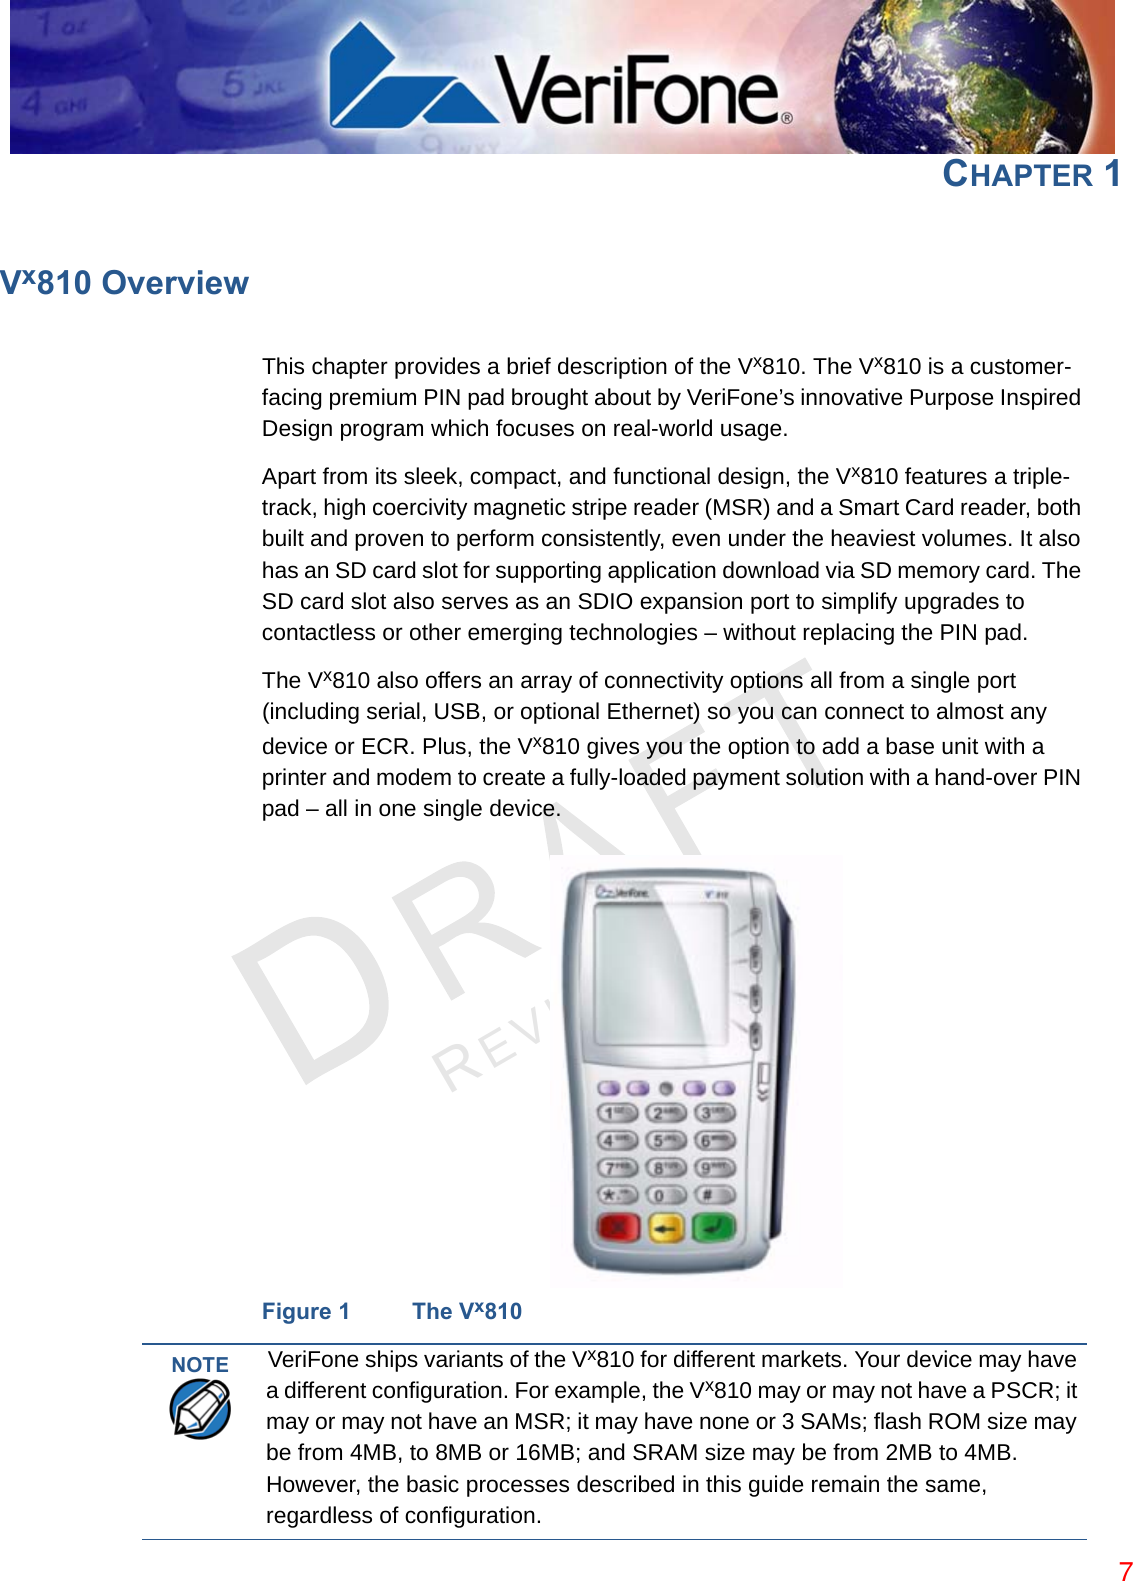 REVISION B.3 CHAPTER 1Vx810 OverviewThis chapter provides a brief description of the Vx810. The Vx810 is a customer-facing premium PIN pad brought about by VeriFone’s innovative Purpose Inspired Design program which focuses on real-world usage.Apart from its sleek, compact, and functional design, the Vx810 features a triple-track, high coercivity magnetic stripe reader (MSR) and a Smart Card reader, both built and proven to perform consistently, even under the heaviest volumes. It also has an SD card slot for supporting application download via SD memory card. The SD card slot also serves as an SDIO expansion port to simplify upgrades to contactless or other emerging technologies – without replacing the PIN pad.The Vx810 also offers an array of connectivity options all from a single port (including serial, USB, or optional Ethernet) so you can connect to almost any device or ECR. Plus, the Vx810 gives you the option to add a base unit with a printer and modem to create a fully-loaded payment solution with a hand-over PIN pad – all in one single device.Figure 1 The Vx810NOTE VeriFone ships variants of the Vx810 for different markets. Your device may have a different configuration. For example, the Vx810 may or may not have a PSCR; it may or may not have an MSR; it may have none or 3 SAMs; flash ROM size may be from 4MB, to 8MB or 16MB; and SRAM size may be from 2MB to 4MB. However, the basic processes described in this guide remain the same, regardless of configuration.7